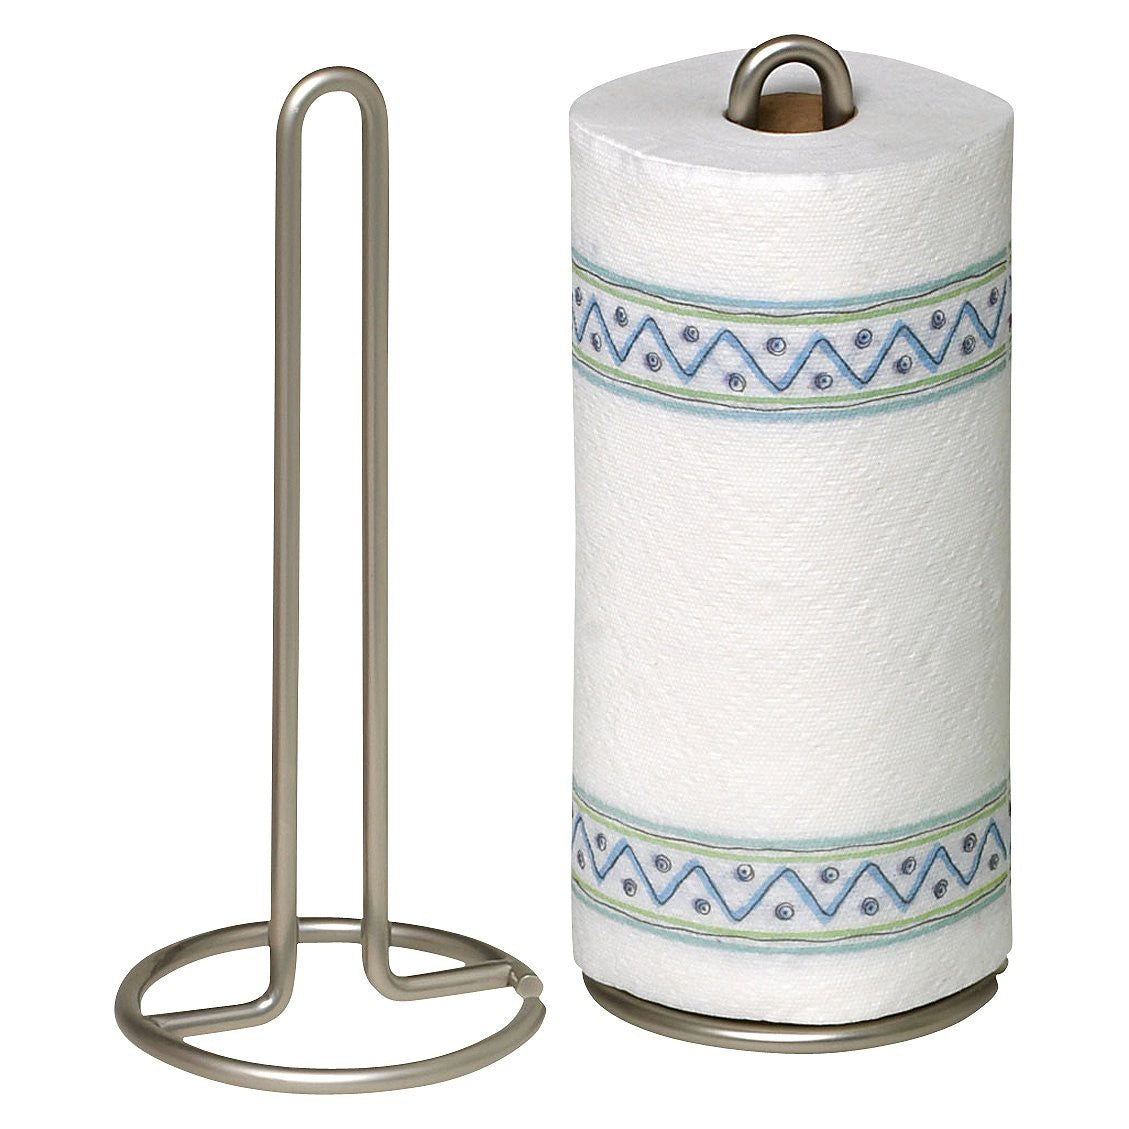 buy paper towel holders at cheap rate in bulk. wholesale & retail storage & organizers solution store.